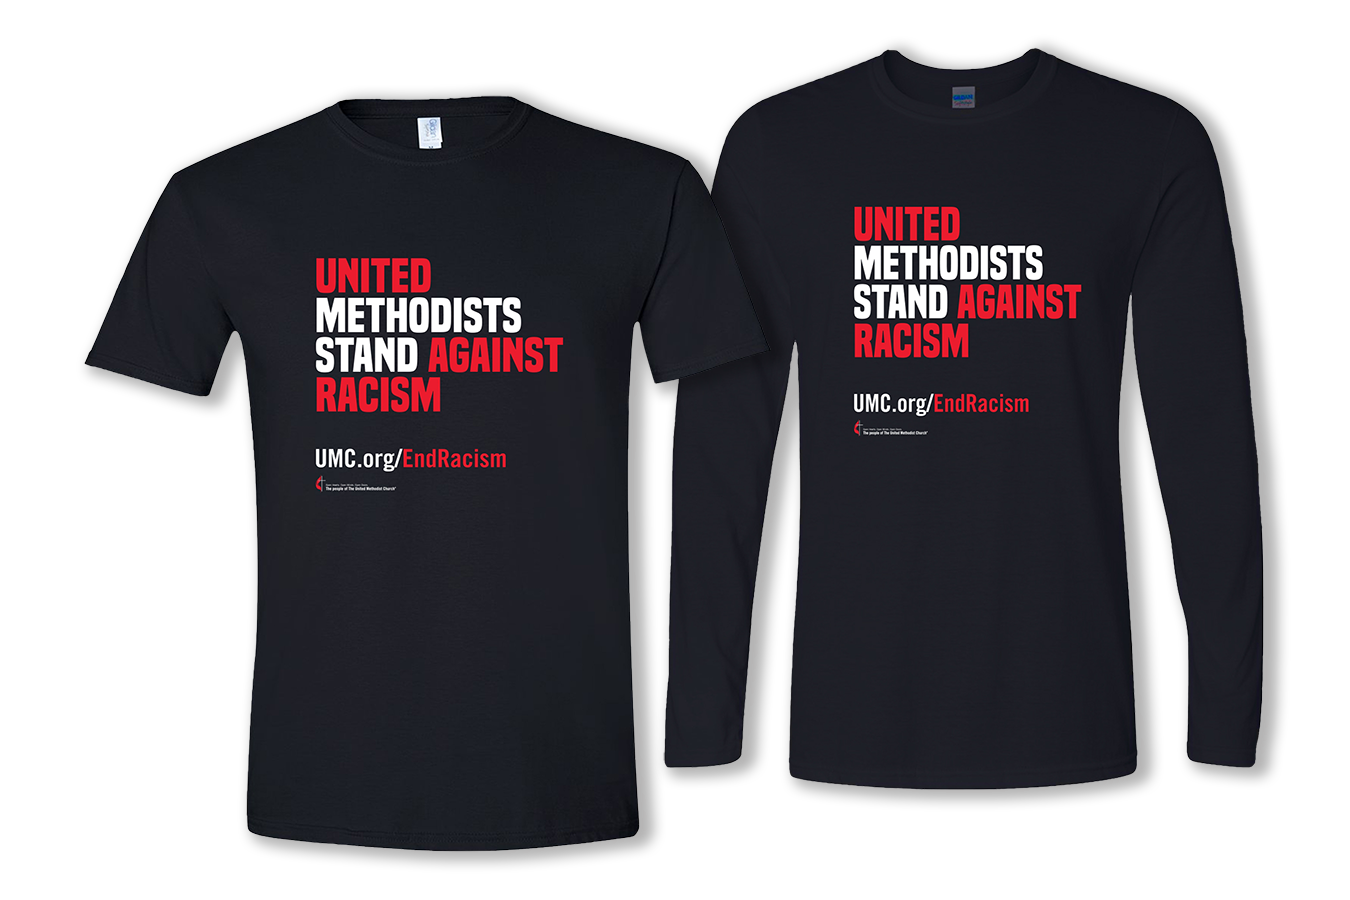 United Methodists Stand Against Racism t-shirts. 